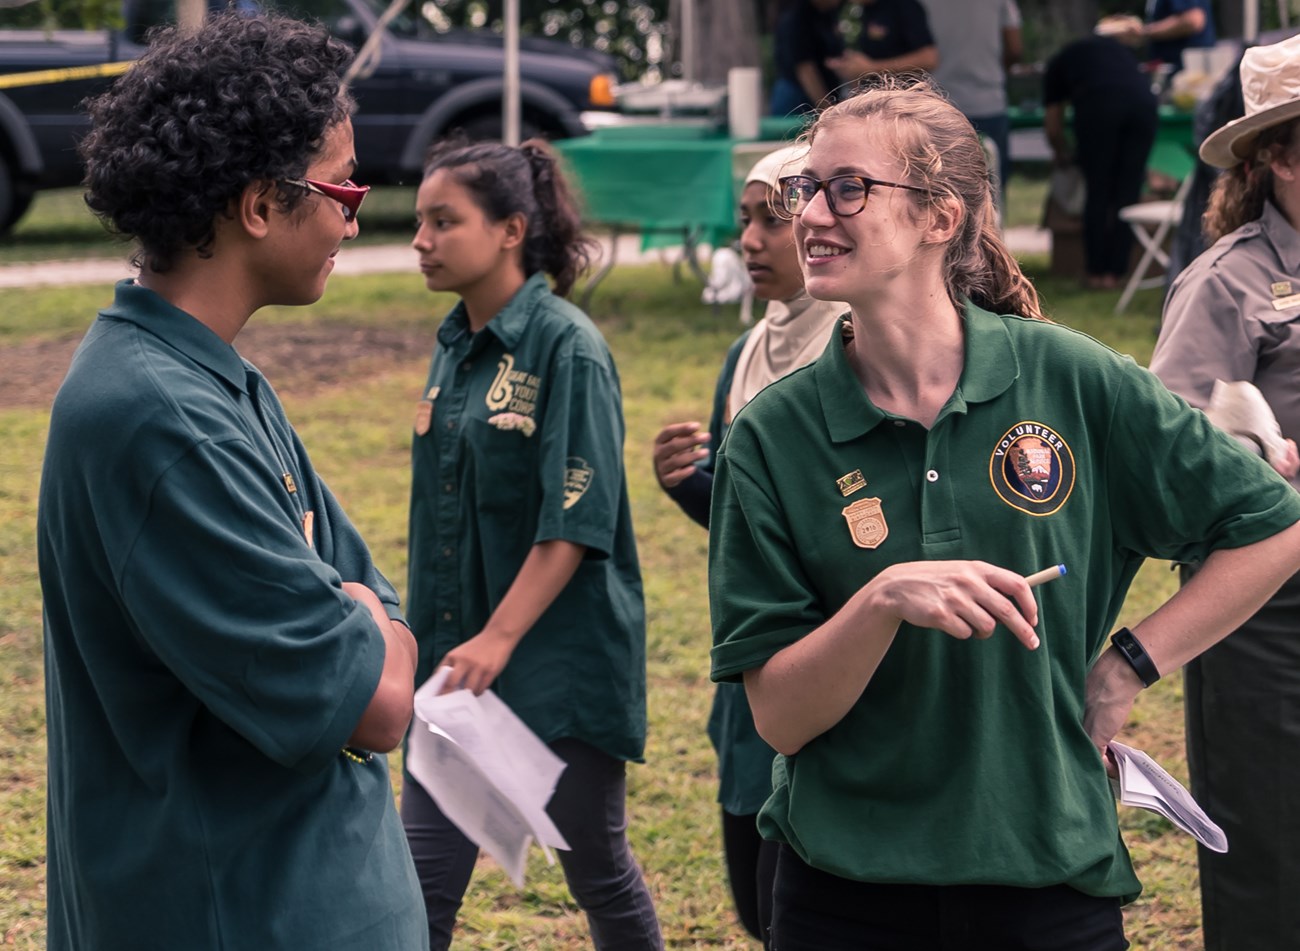 Green shirted volunteers & Great Falls Youth Corps members smile as they collaborate at an event at Paterson Great Falls National Historical Park